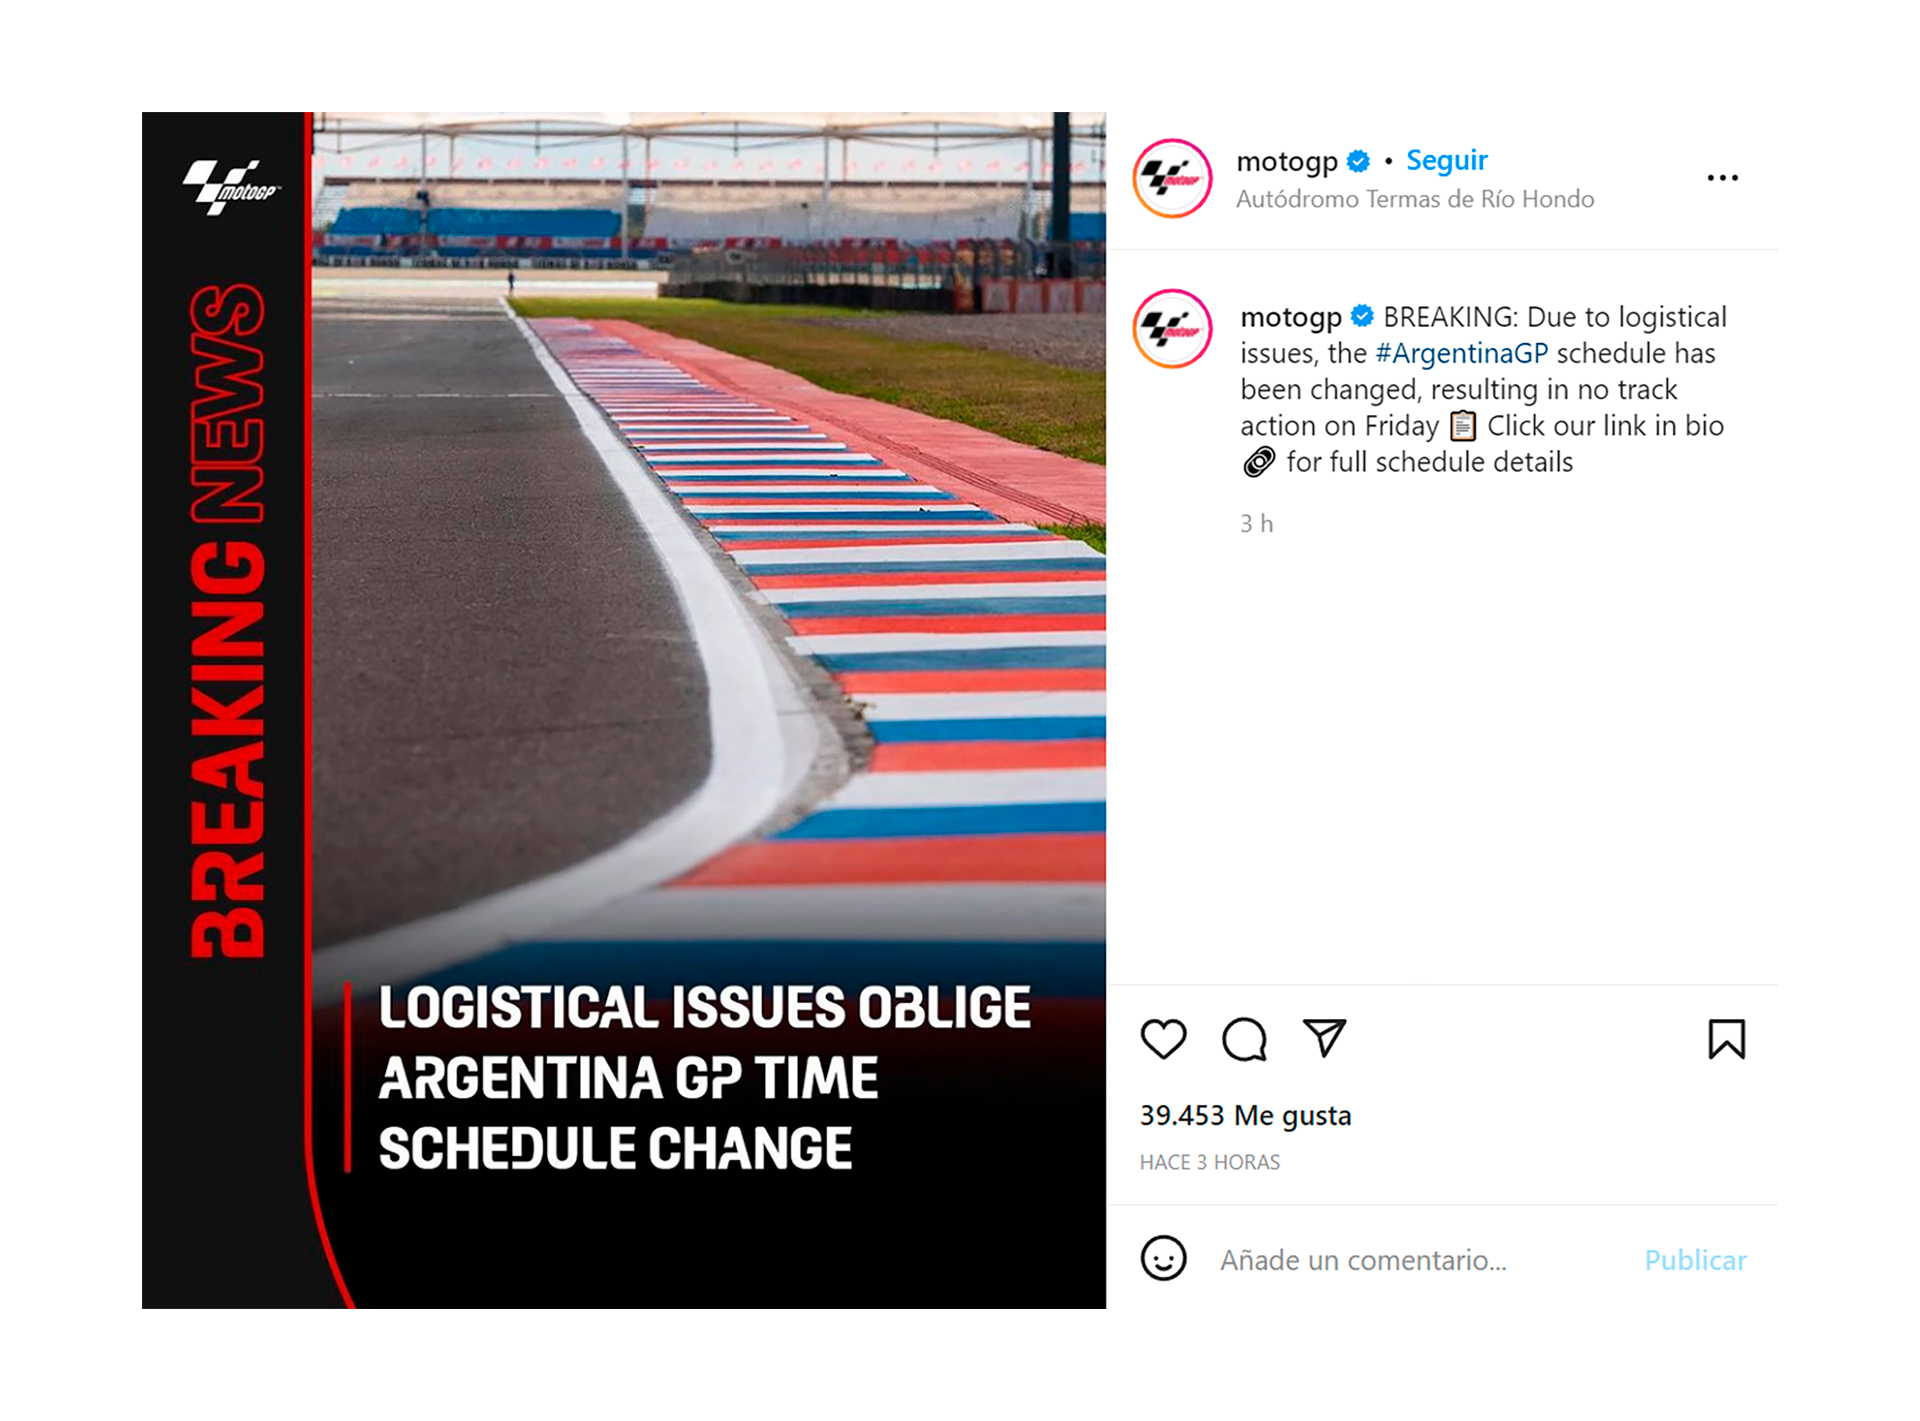 The MotoGP post with the announcement of the change in the schedule